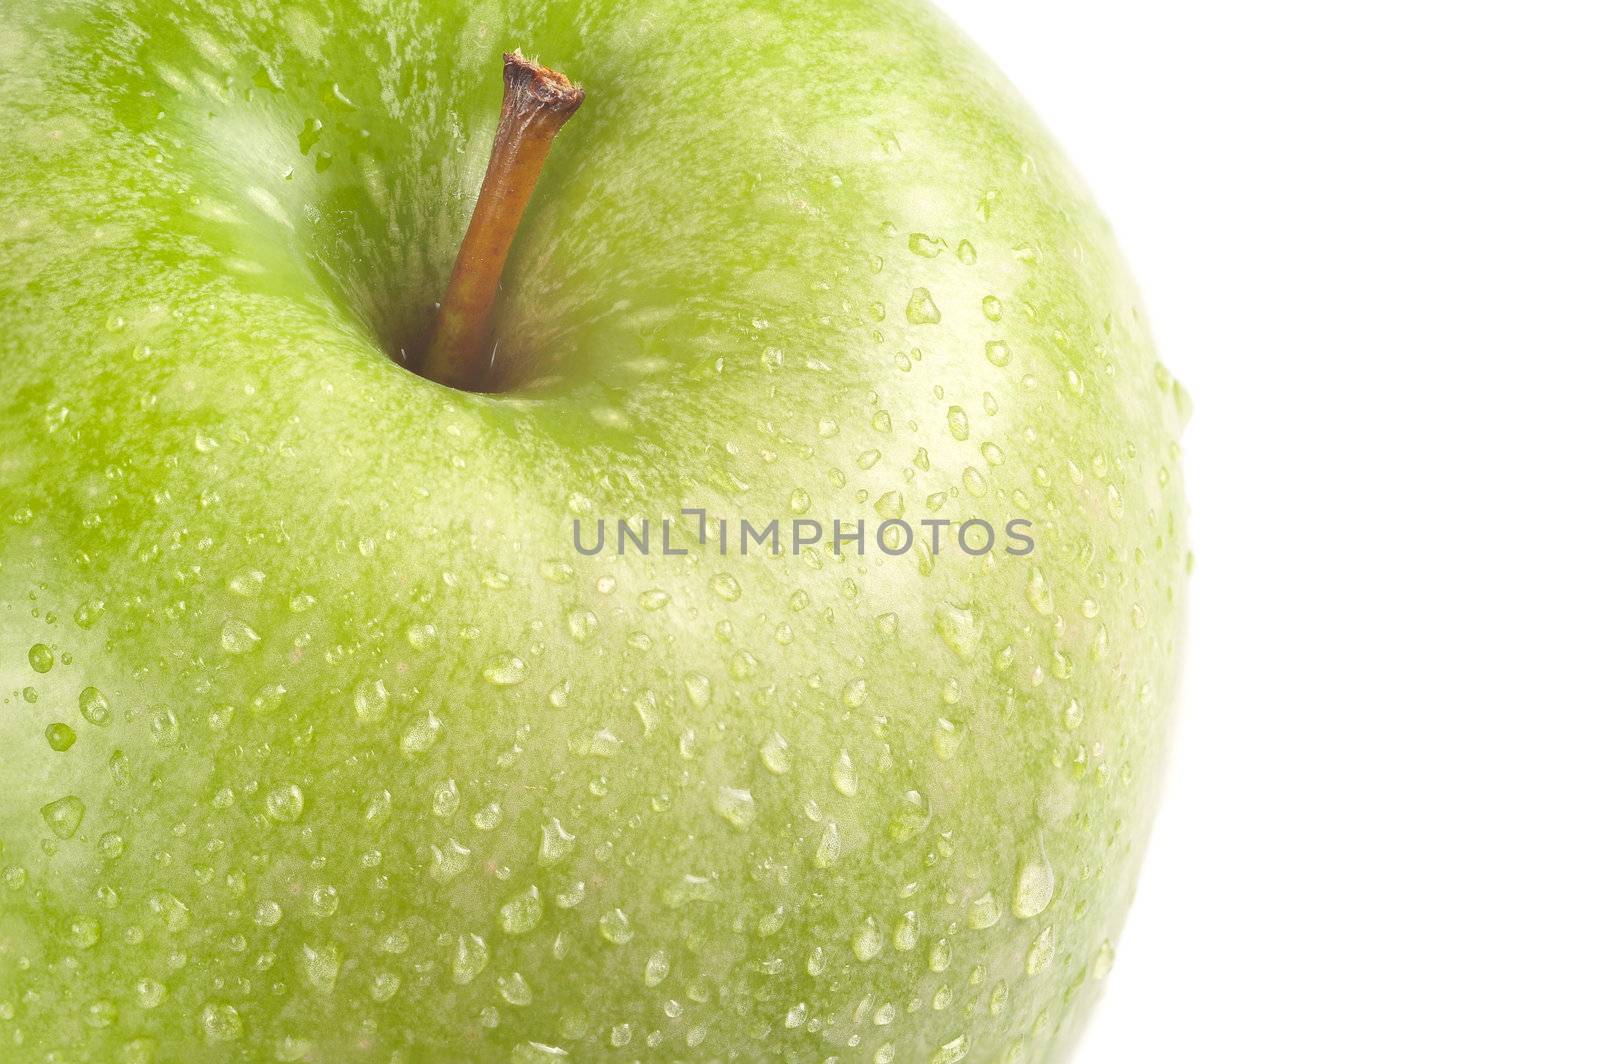 Isolated detail shot of a fresh green apple with stem and drops of water on it.